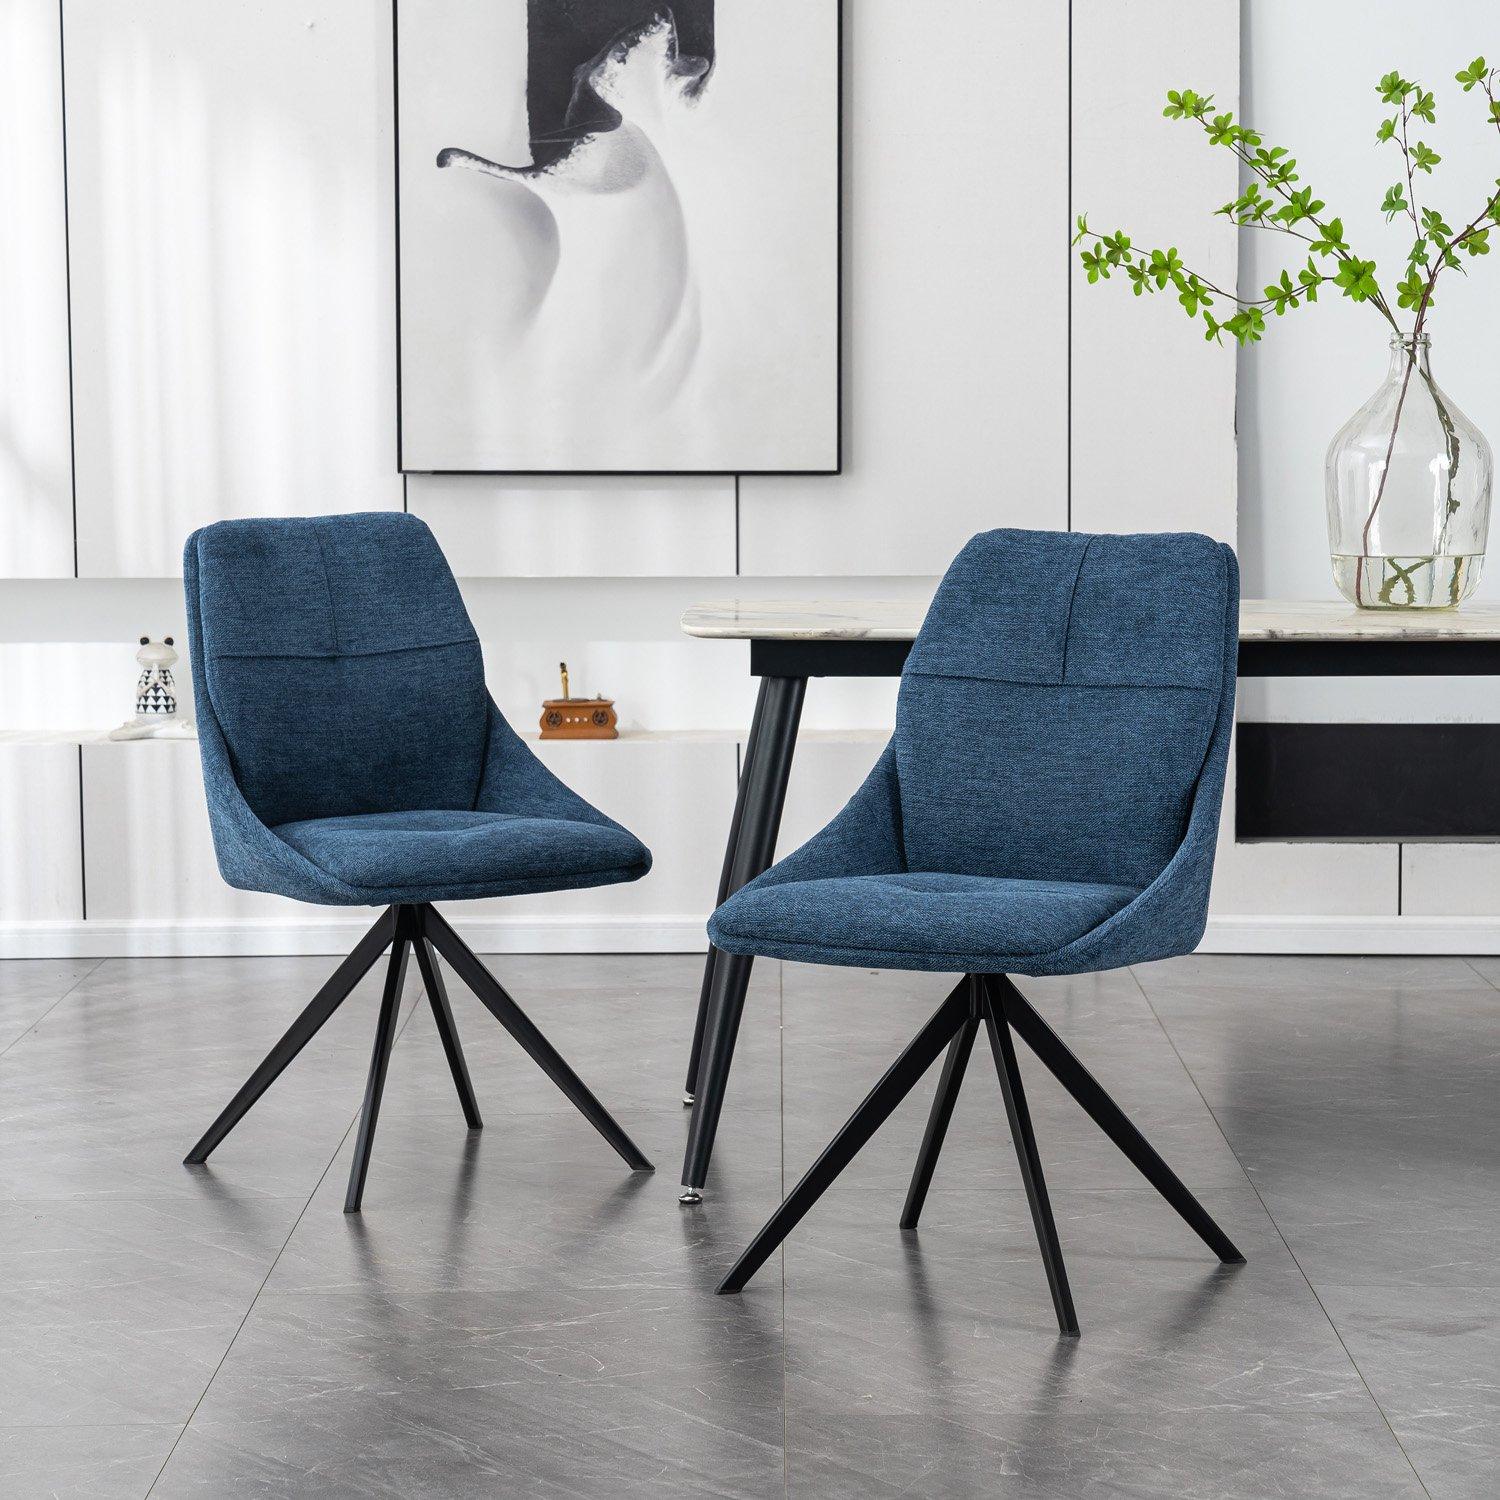 Set of 8 Luna Modern Fabric Dining Chair Padded Seat w Arms Metal Legs